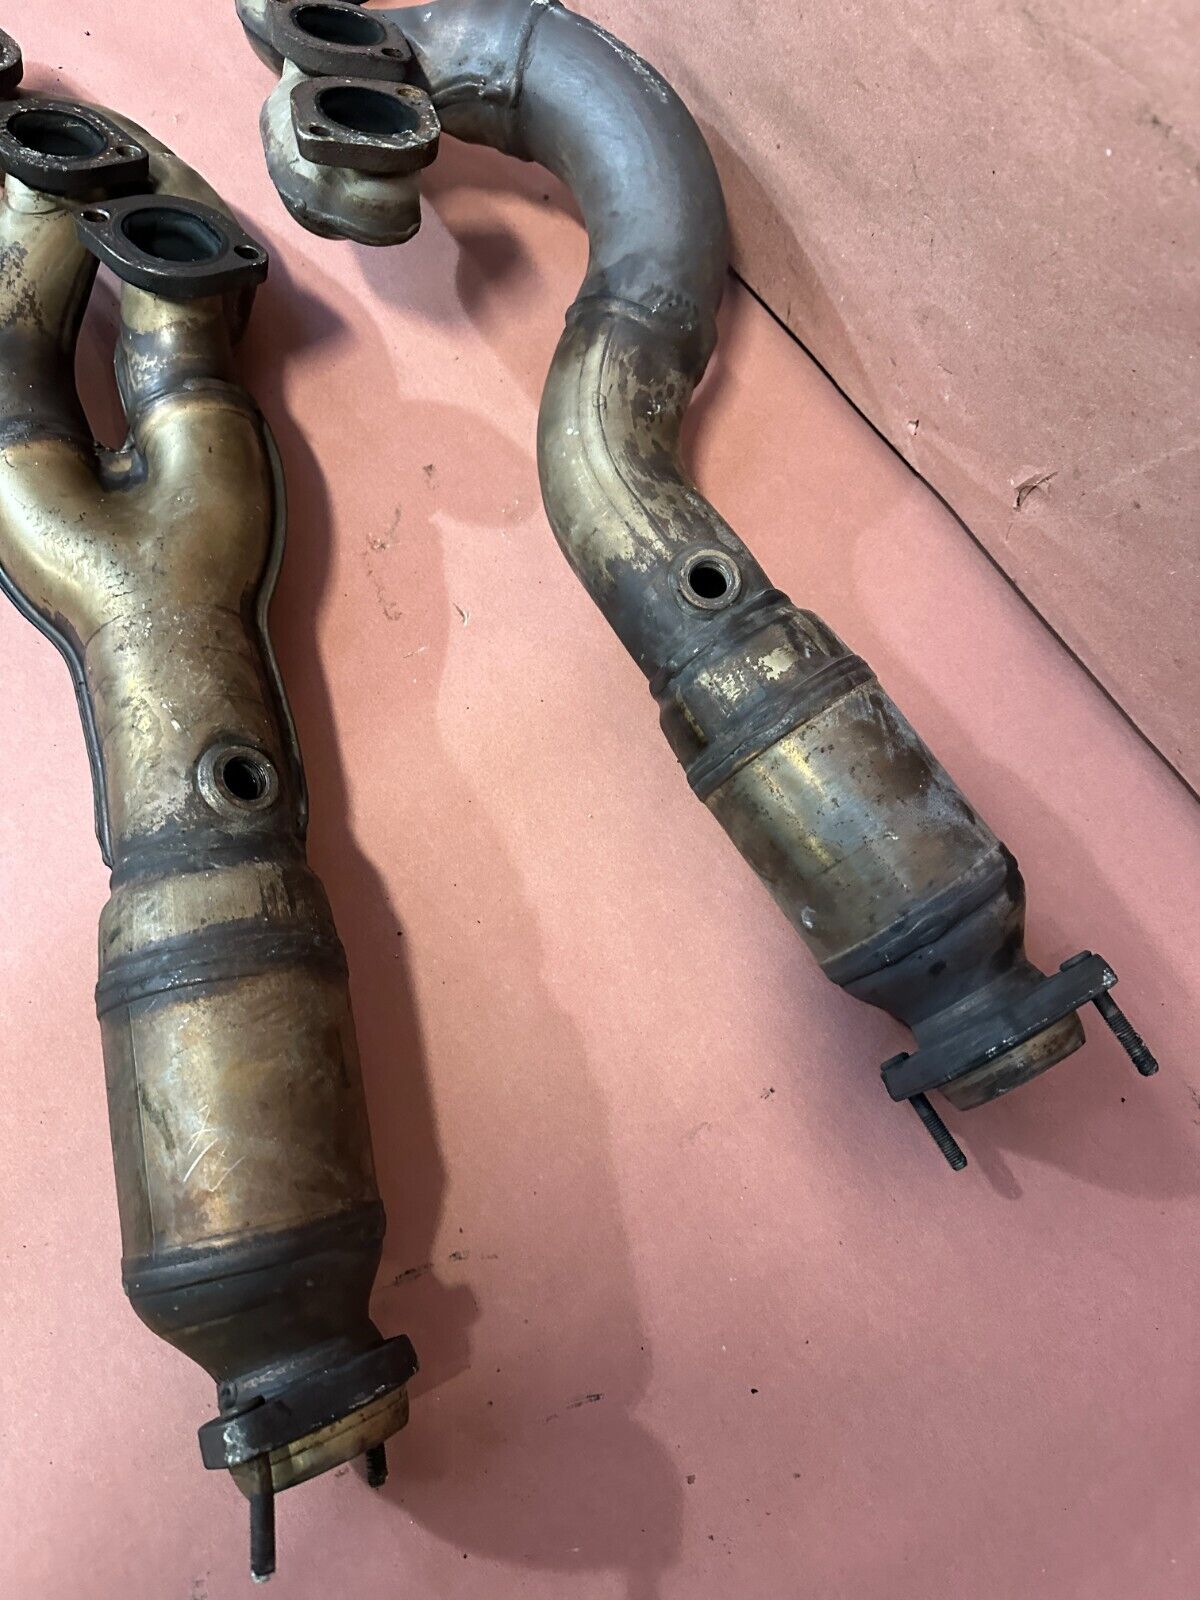 BMW E38 740IL E39 540I M62 Exhaust Manifolds Pipes Headers OEM 127K MLS Tested